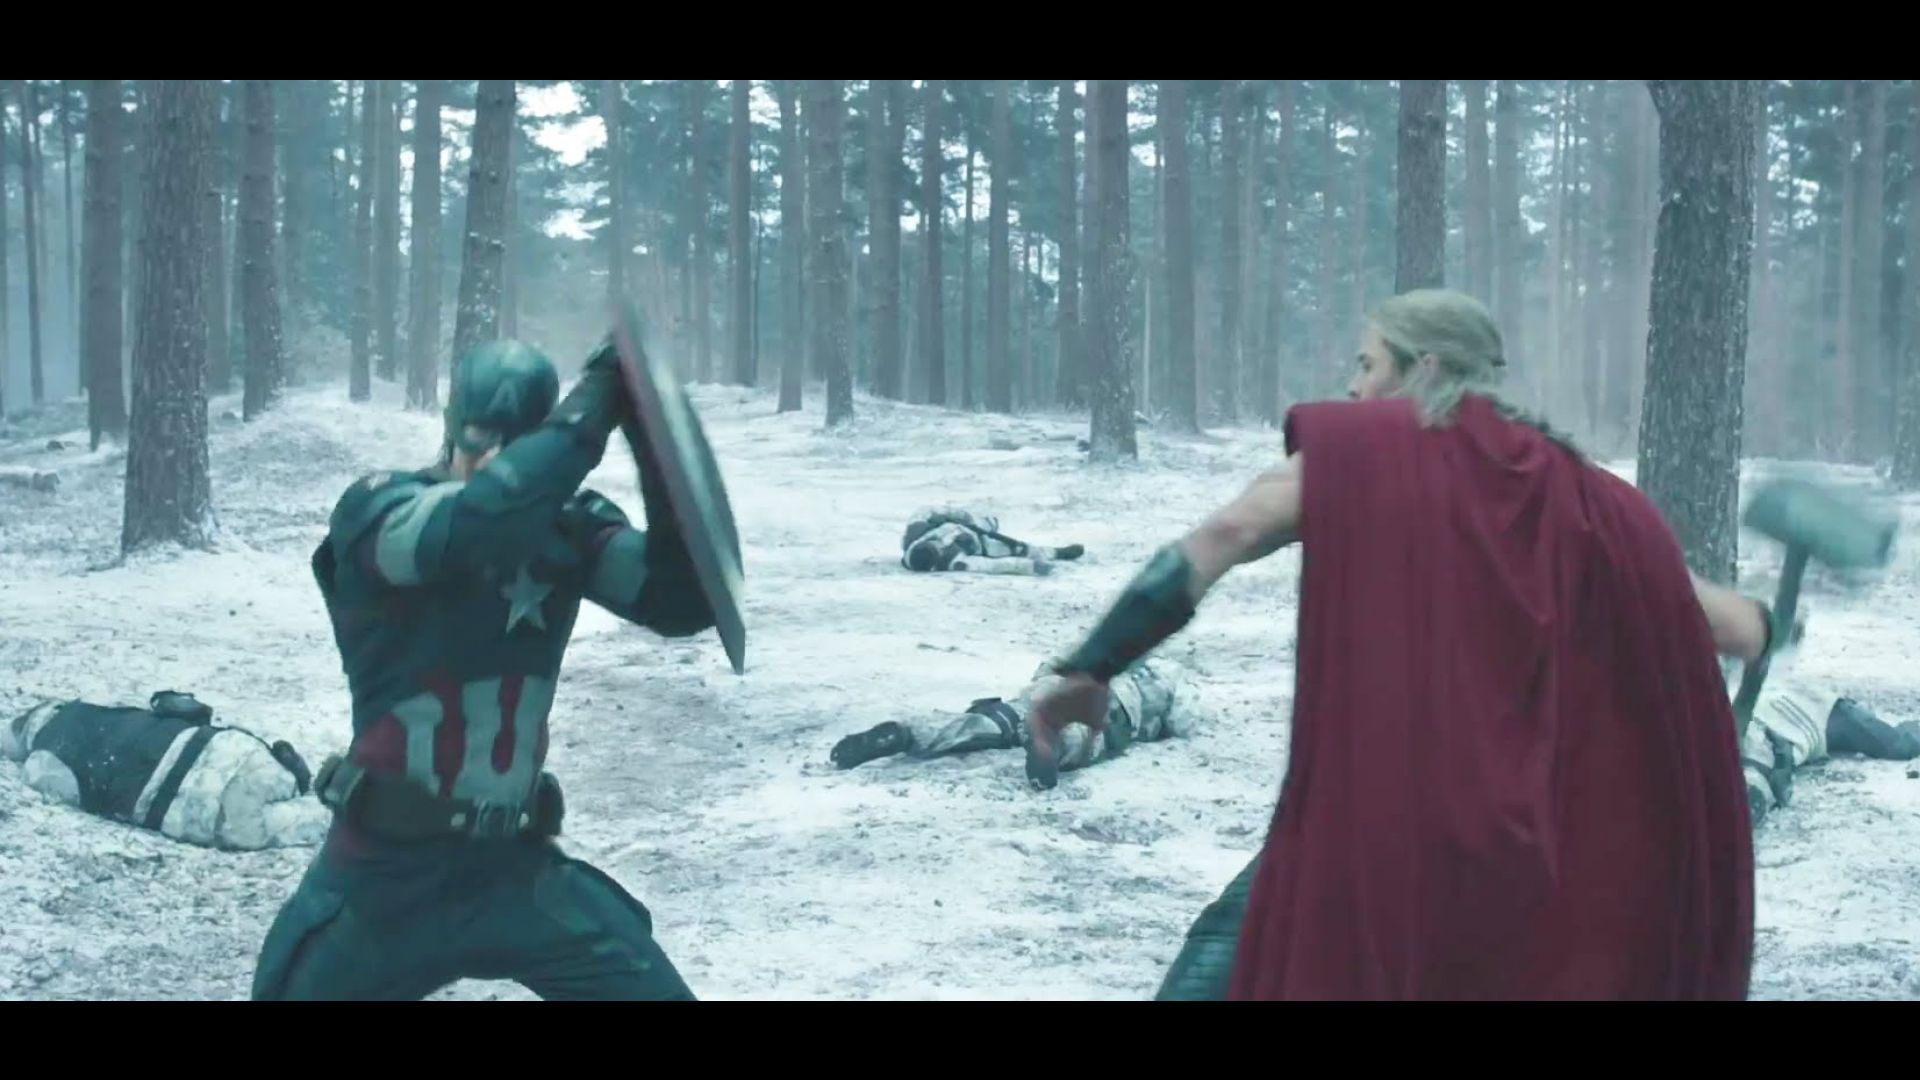 Relive the Avengers: Age Of Ultron opening scene